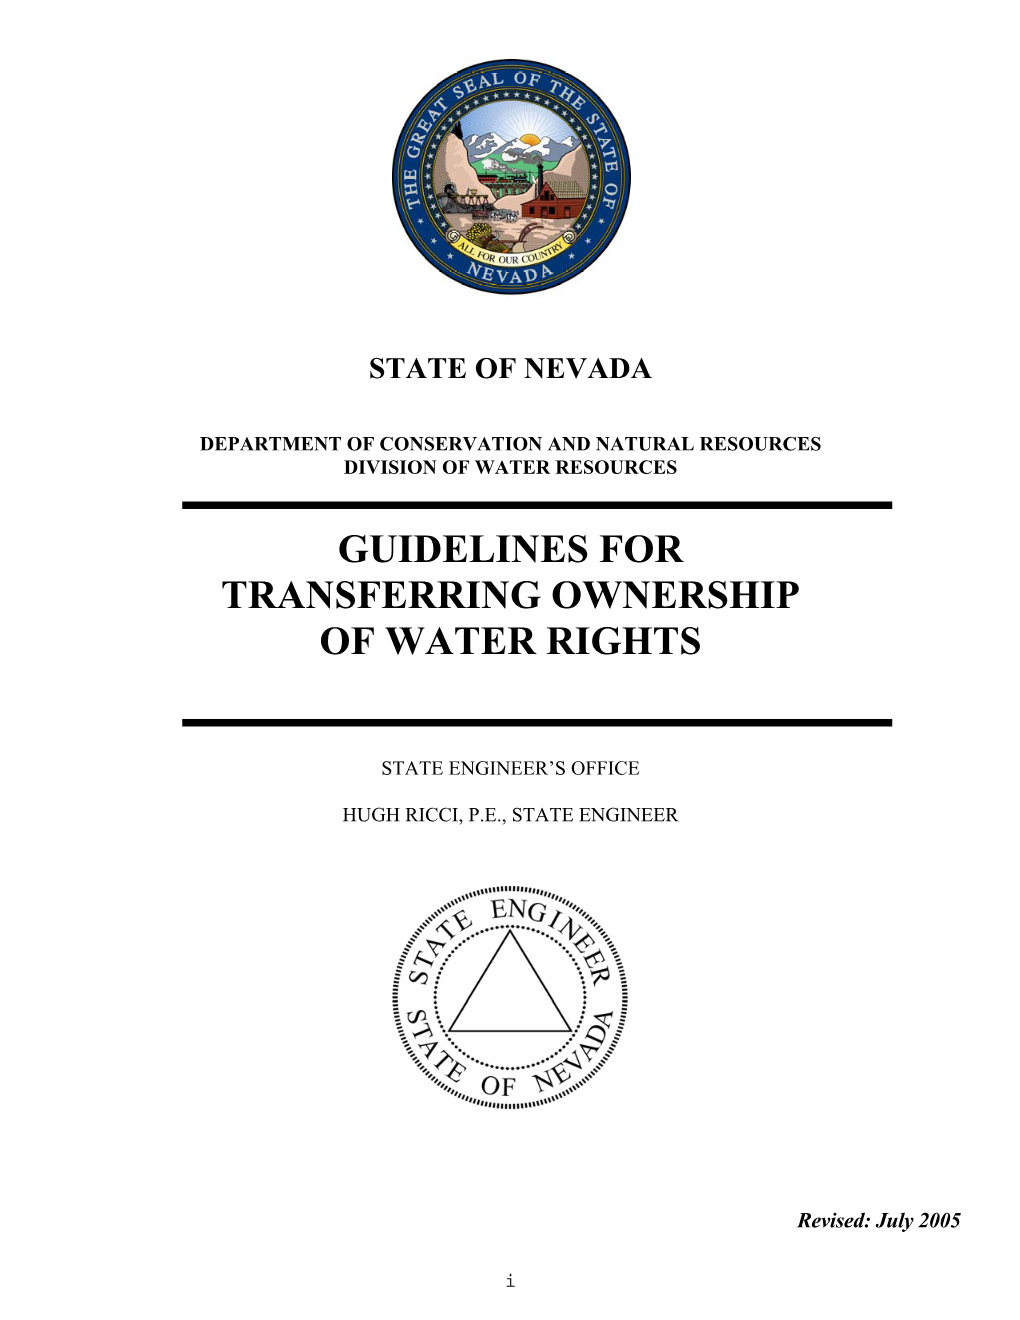 Guidelines for Transferring Ownership of Water Rights